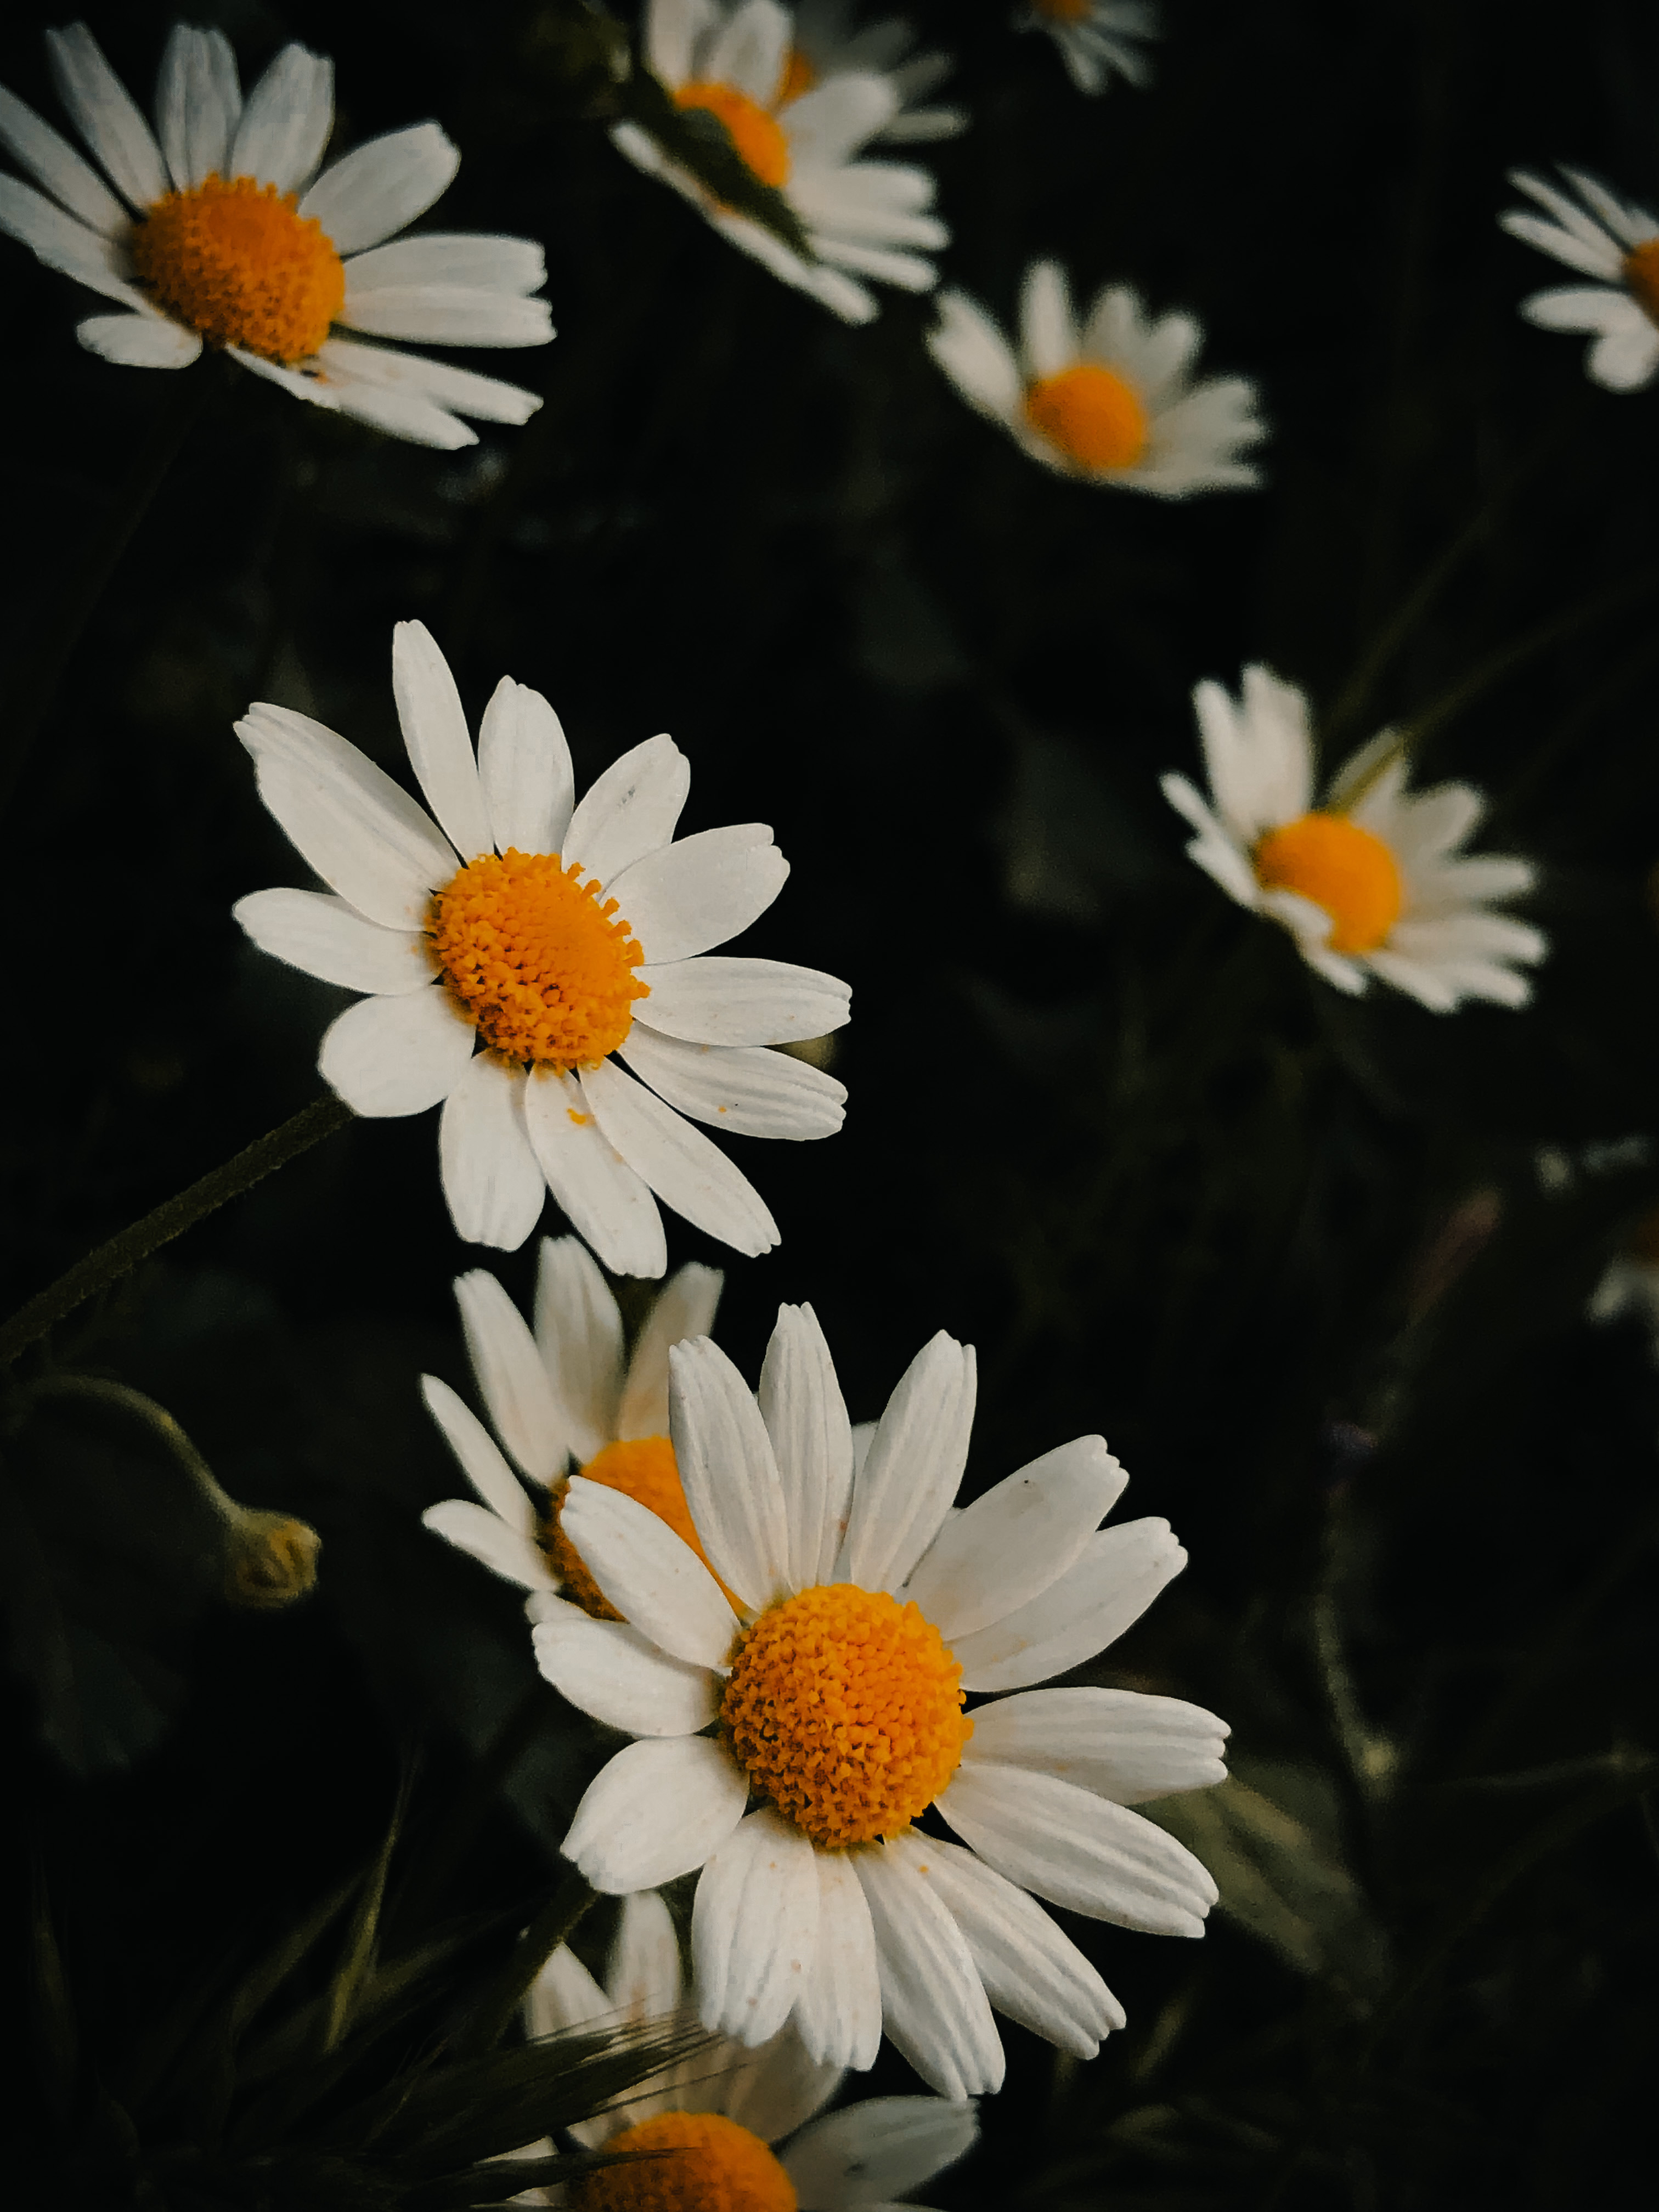 A group of white daisies with yellow centers - Daisy